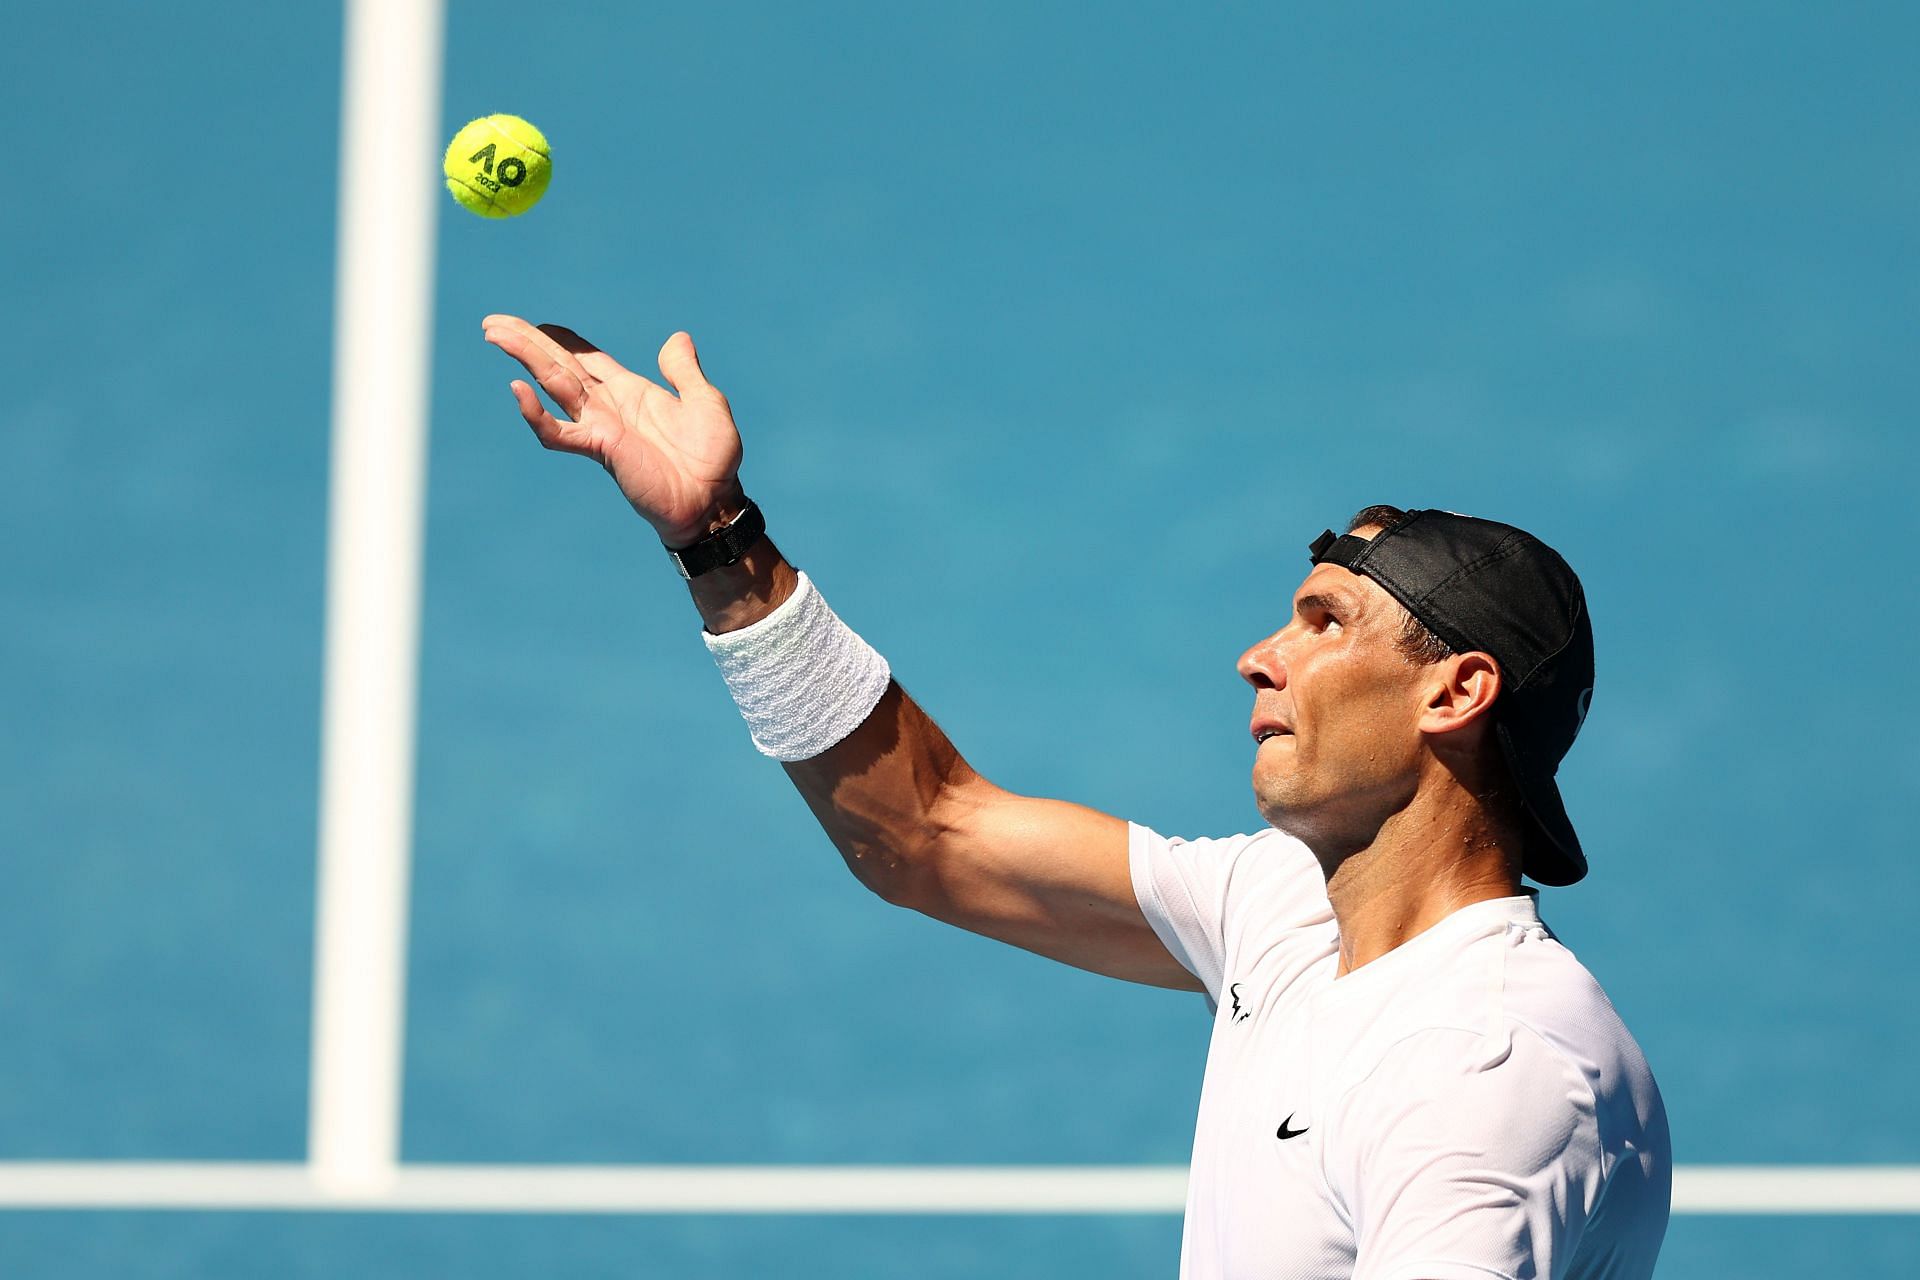 Rafael Nadal will look to defend his title at the Australian Open next week.